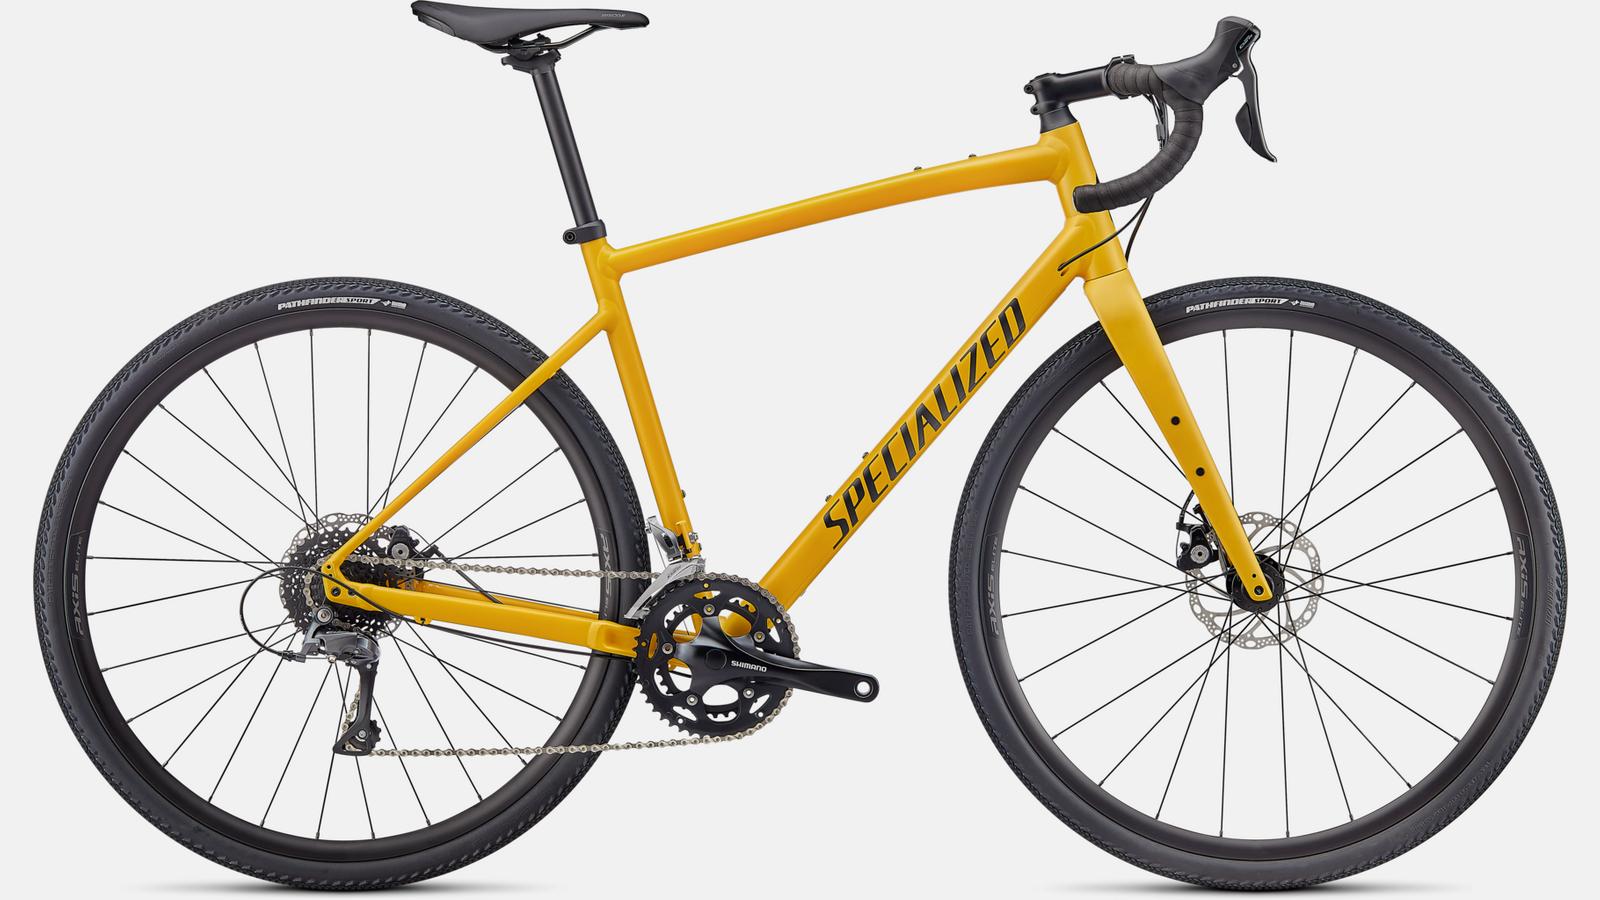 Paint for 2022 Specialized Diverge E5 - Satin Brassy Yellow